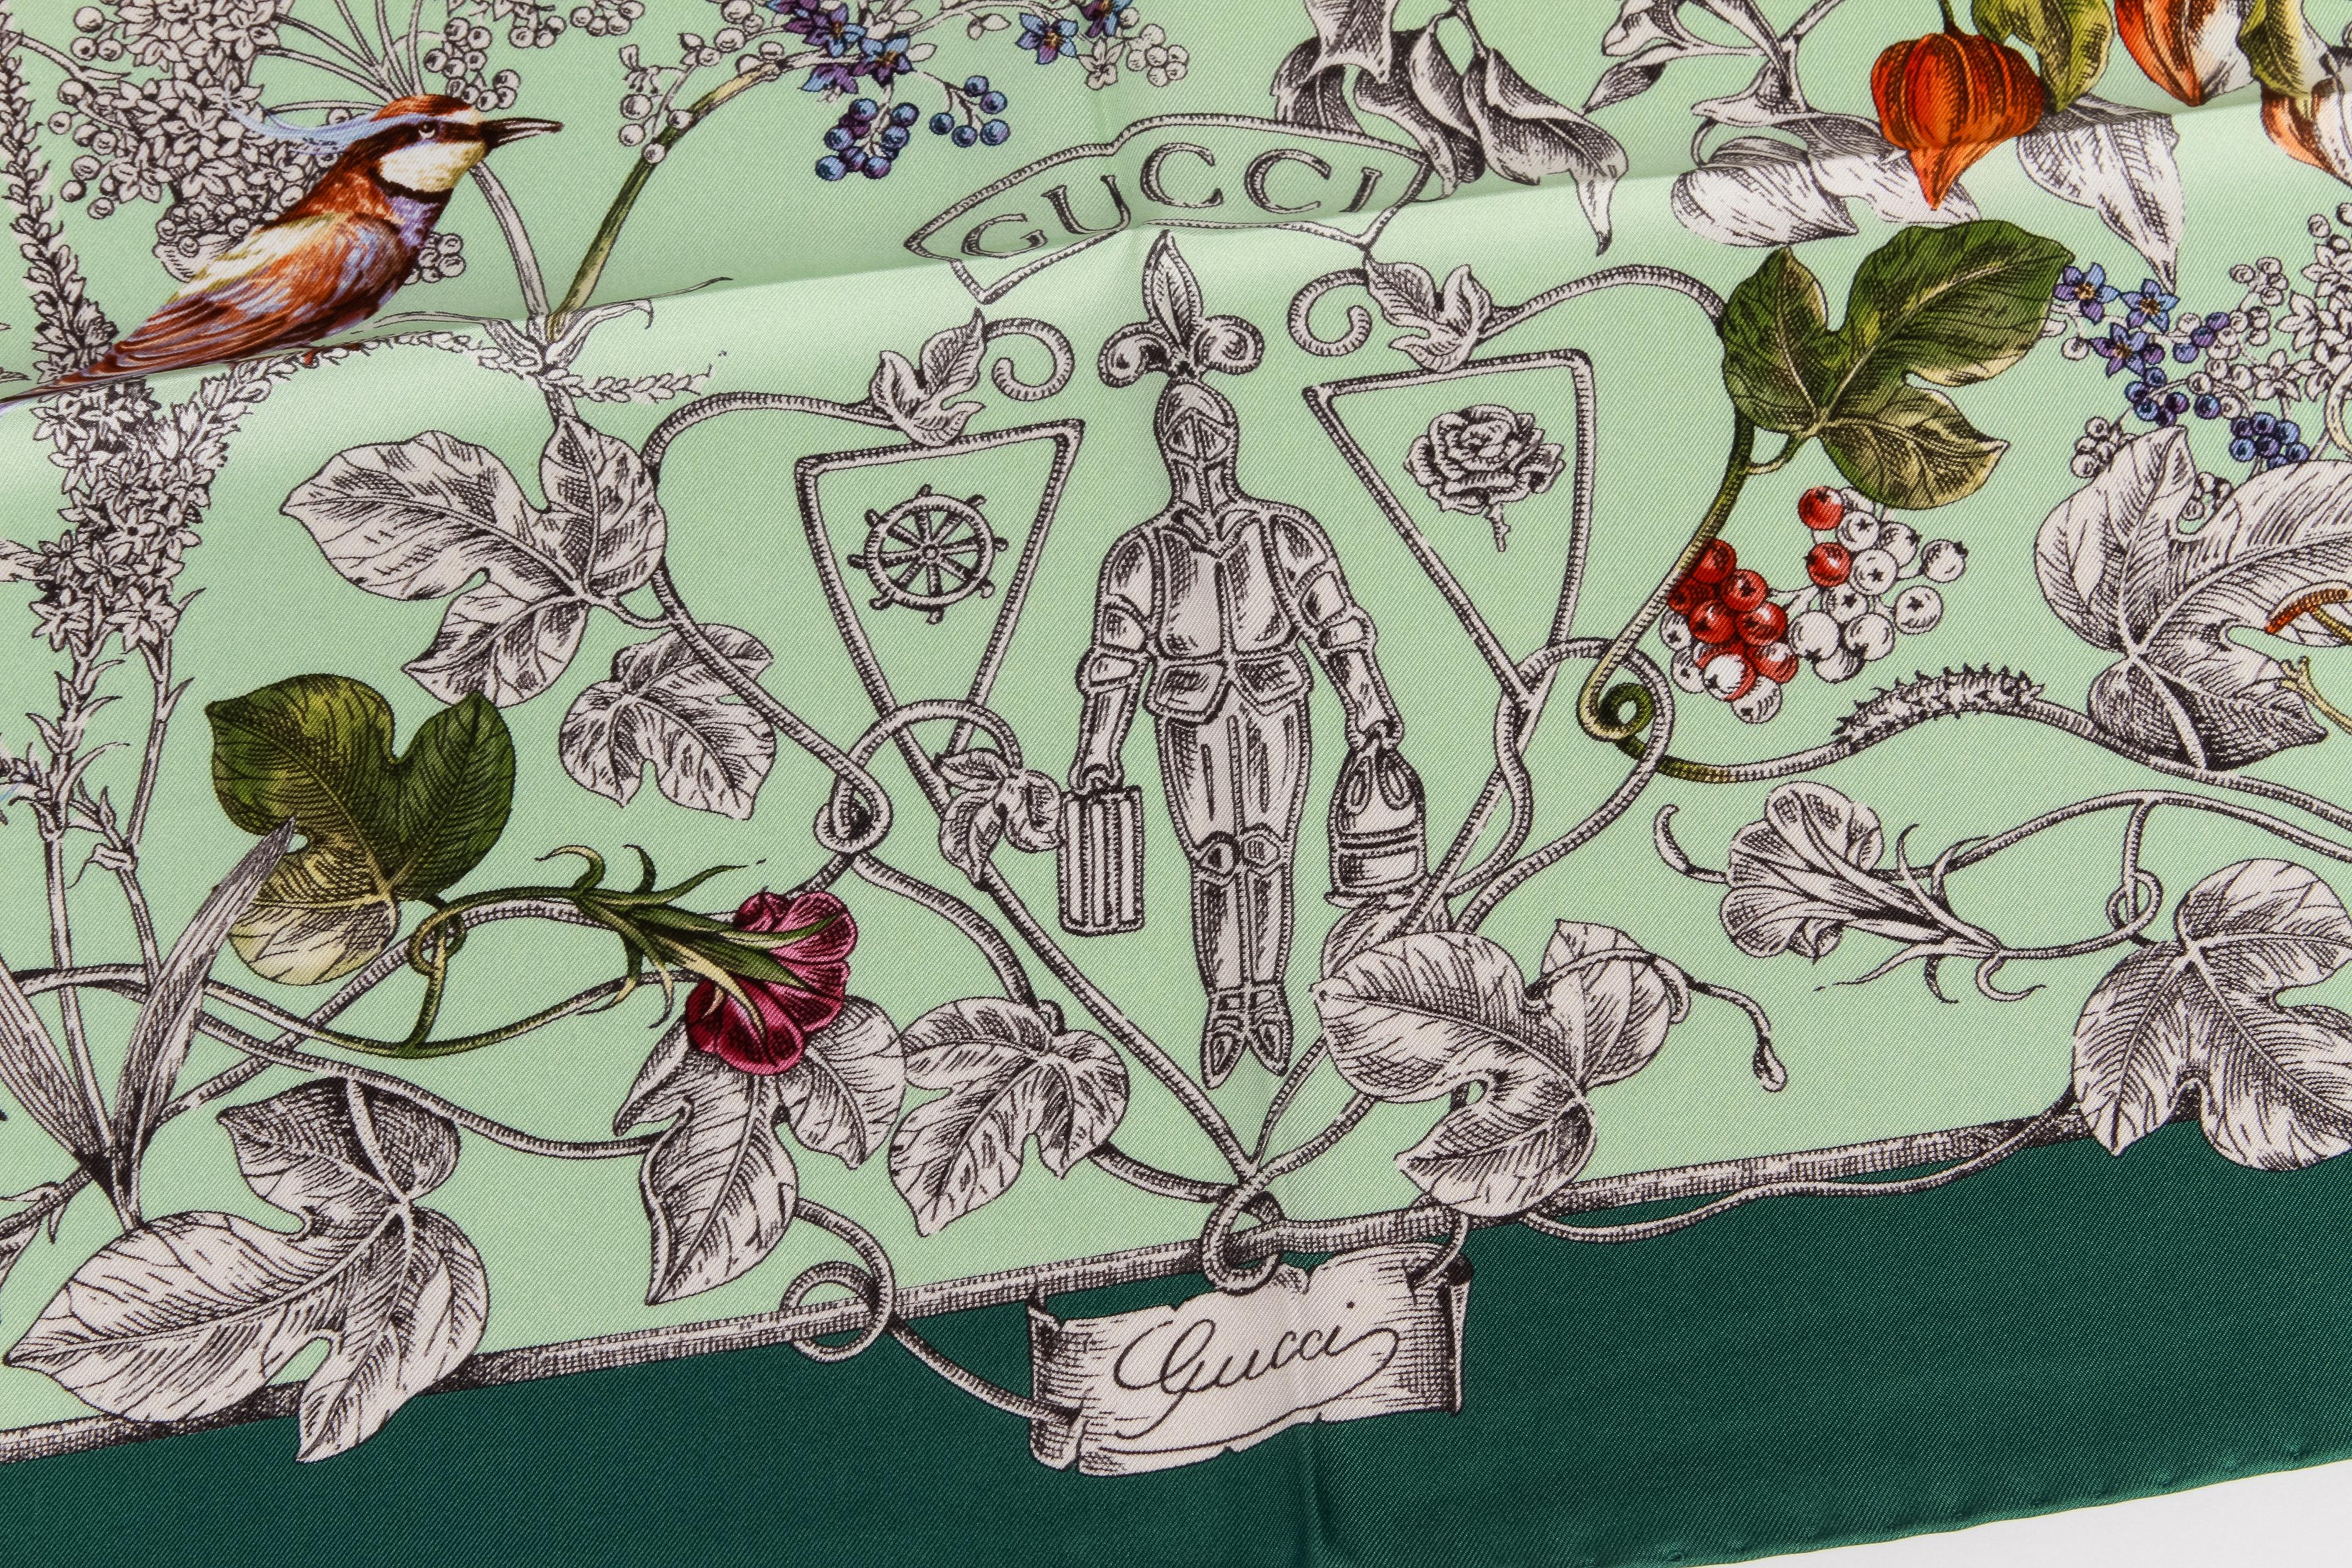 Gucci brand new scarf with flowers and birds, green, mint color way, 100% silk, 35